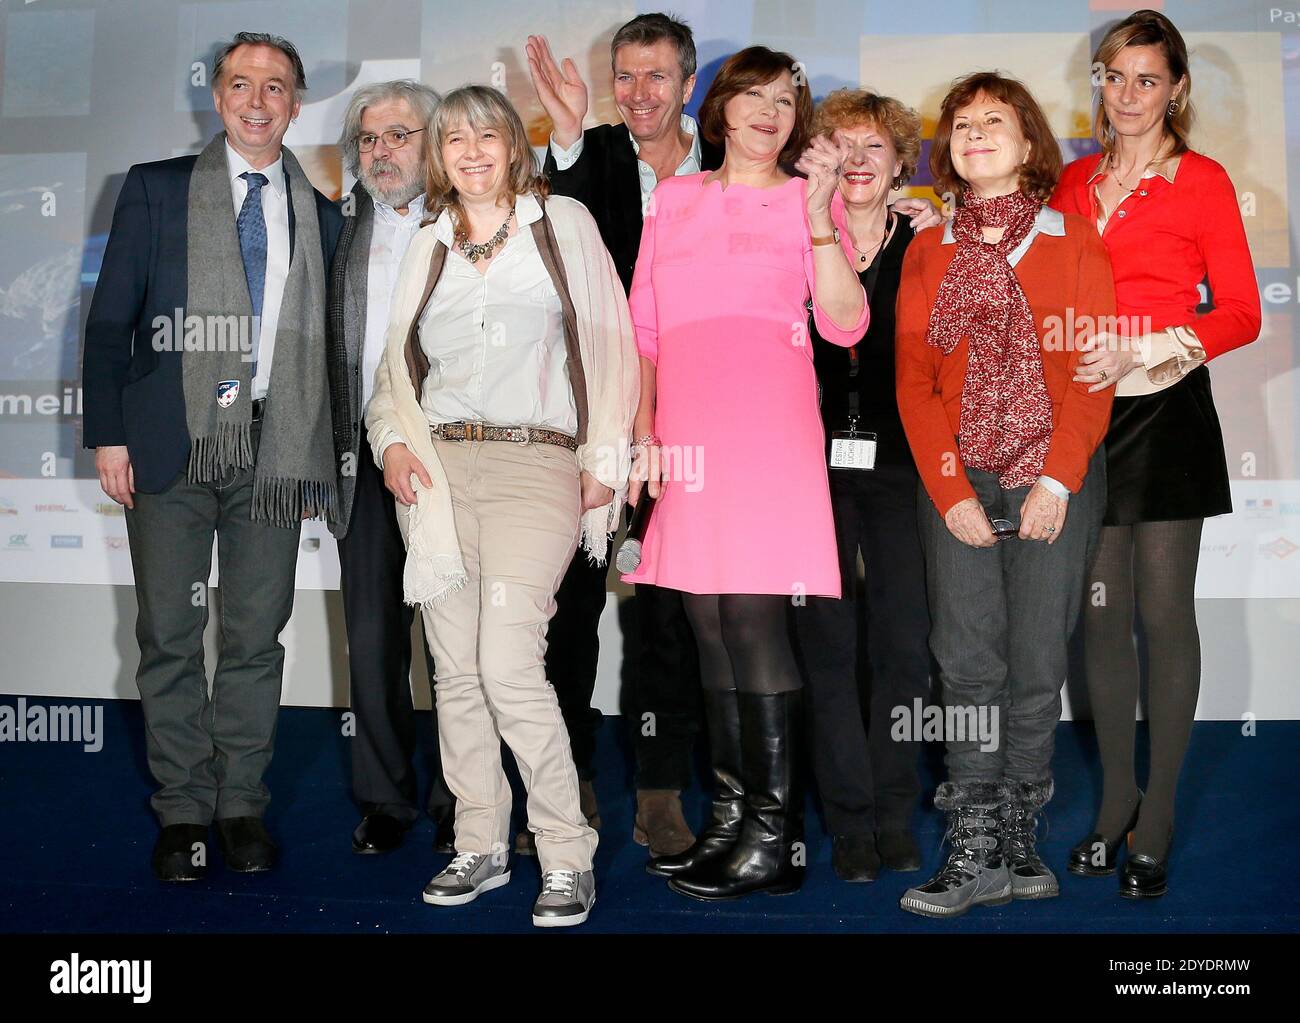 Macha Meril and jury's members Philippe Chevalier, Jean Musy, Caroline  Huppert, Benedicte Lesage, Anne Consigny, Sophie Deschamps and Philippe  Caroit during the 15th Luchon International Television Film Festival in  Luchon, French Pyrenees,